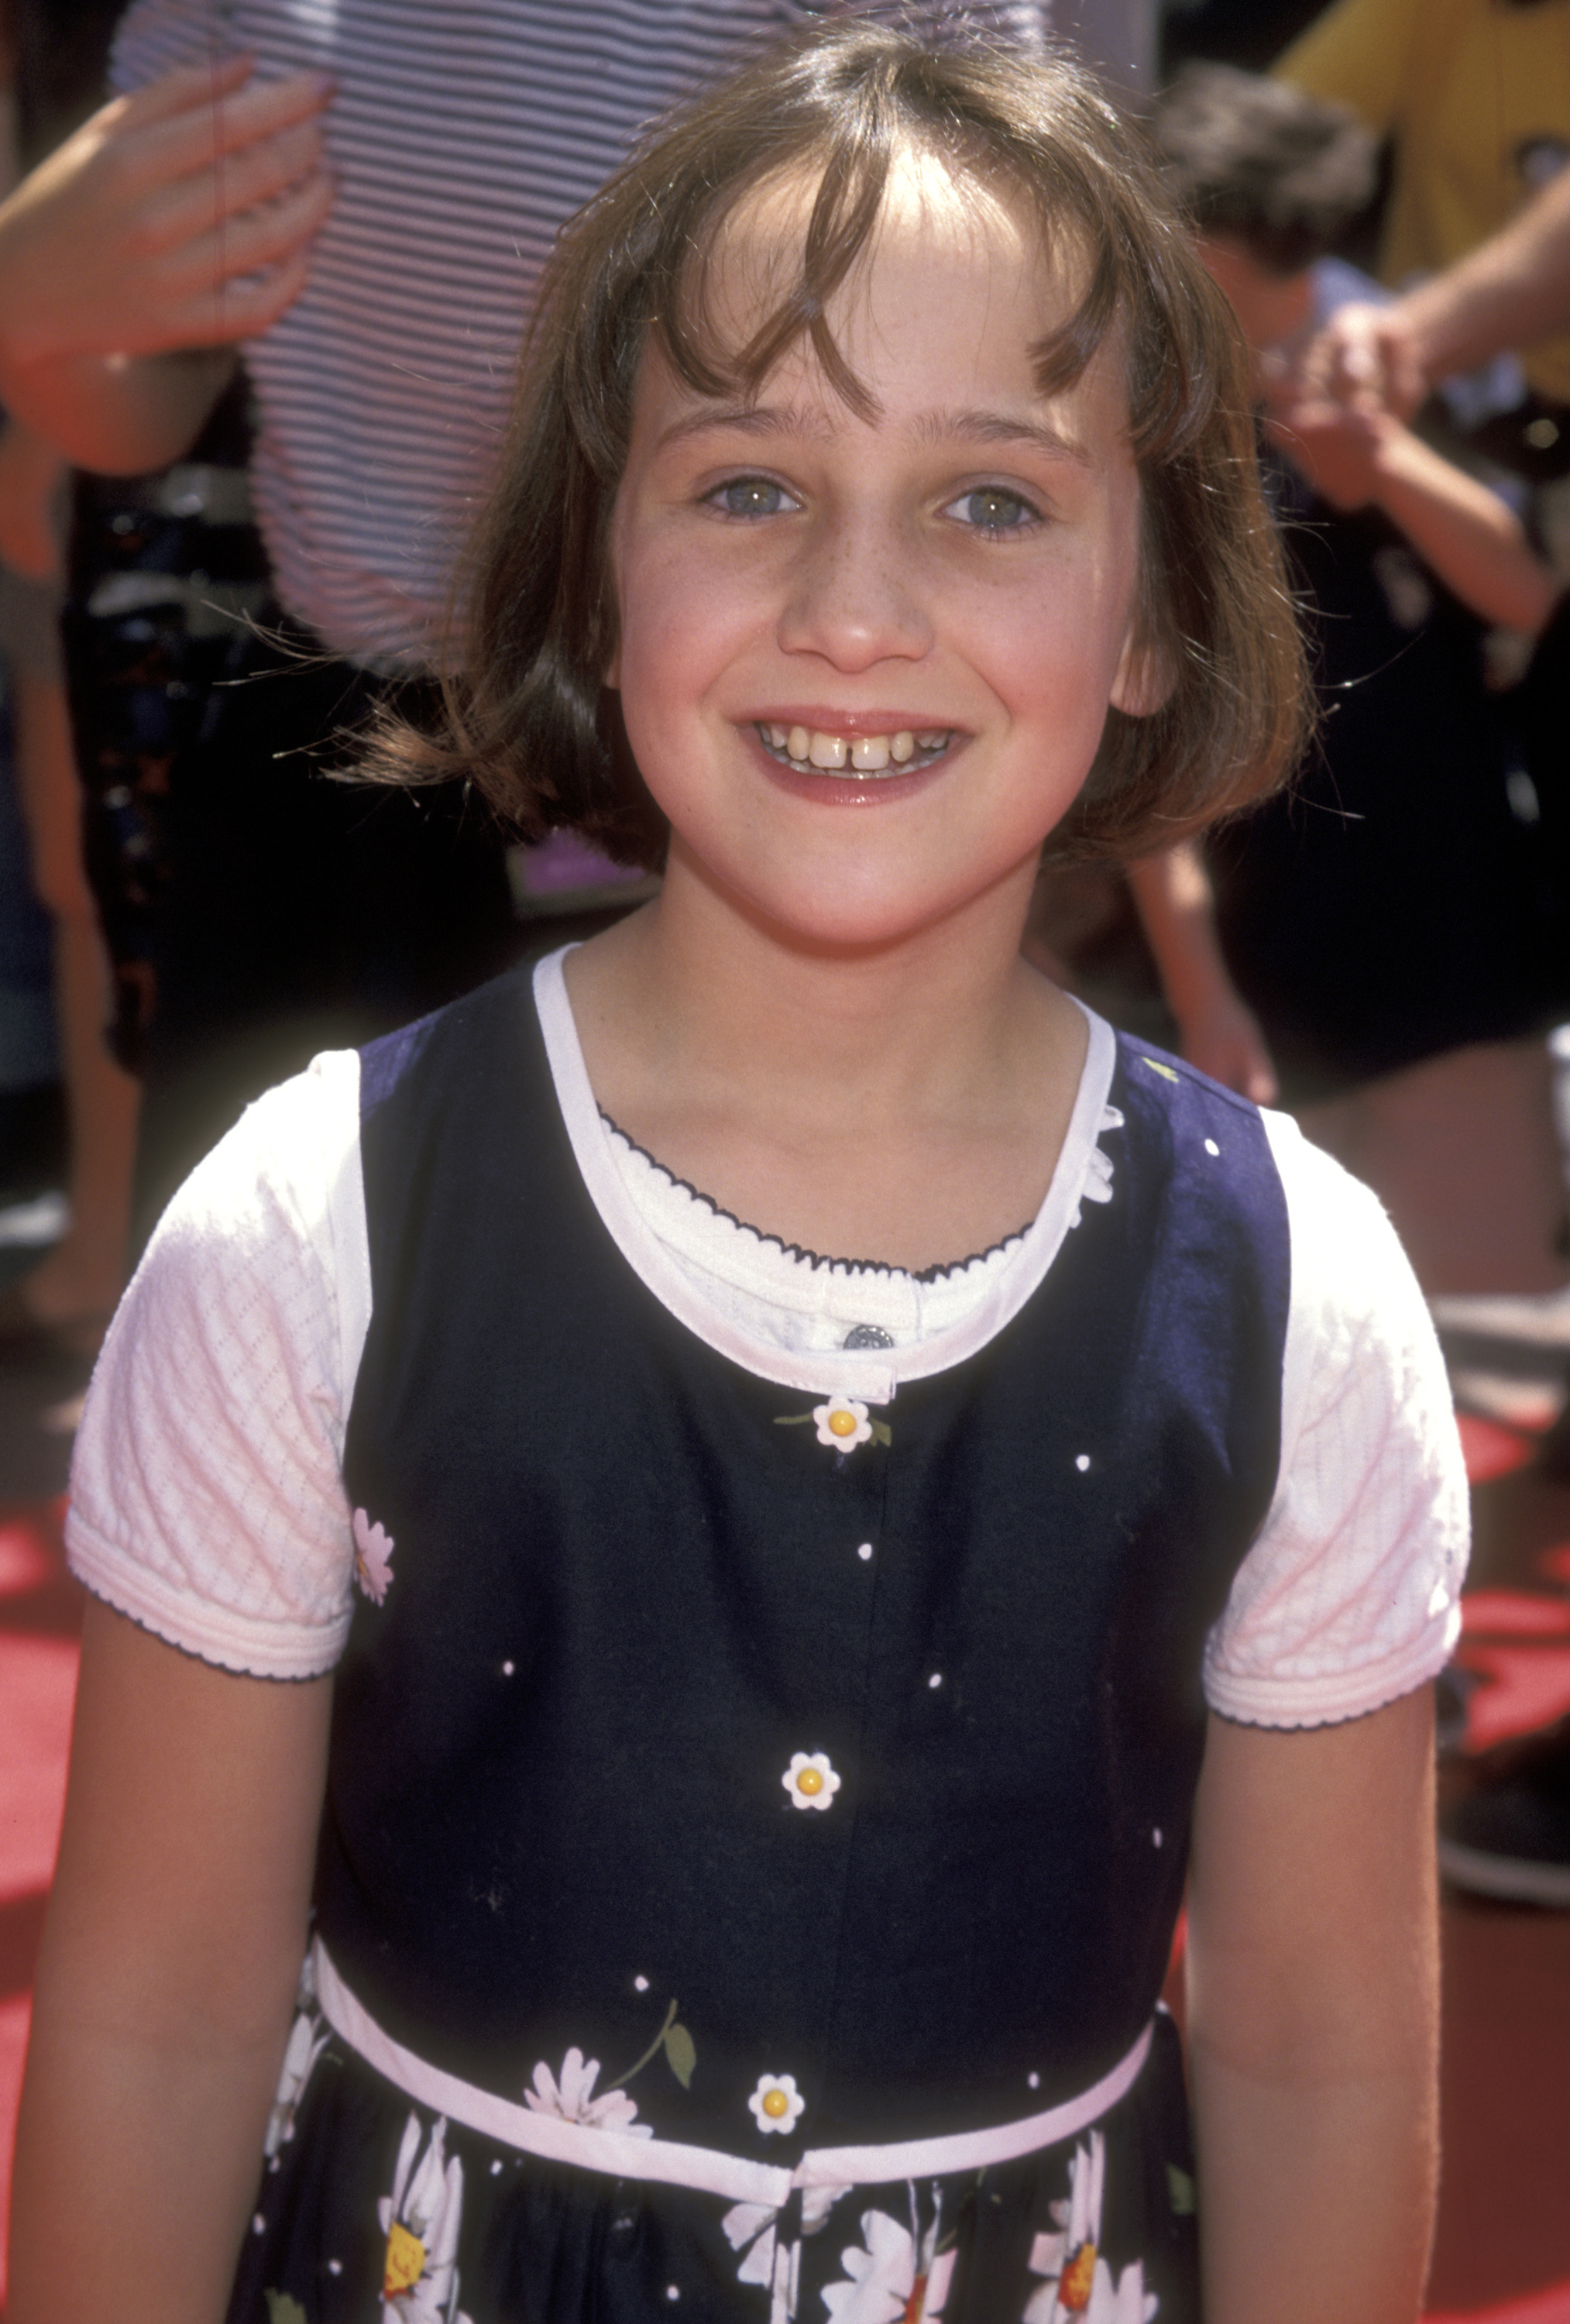 Mara Wilson attends 'A Simple Wish' Universal City Premiere at Cineplex Odeon Universal City Cinemas in Universal City, California, on June 29, 1997. | Source: Getty Images